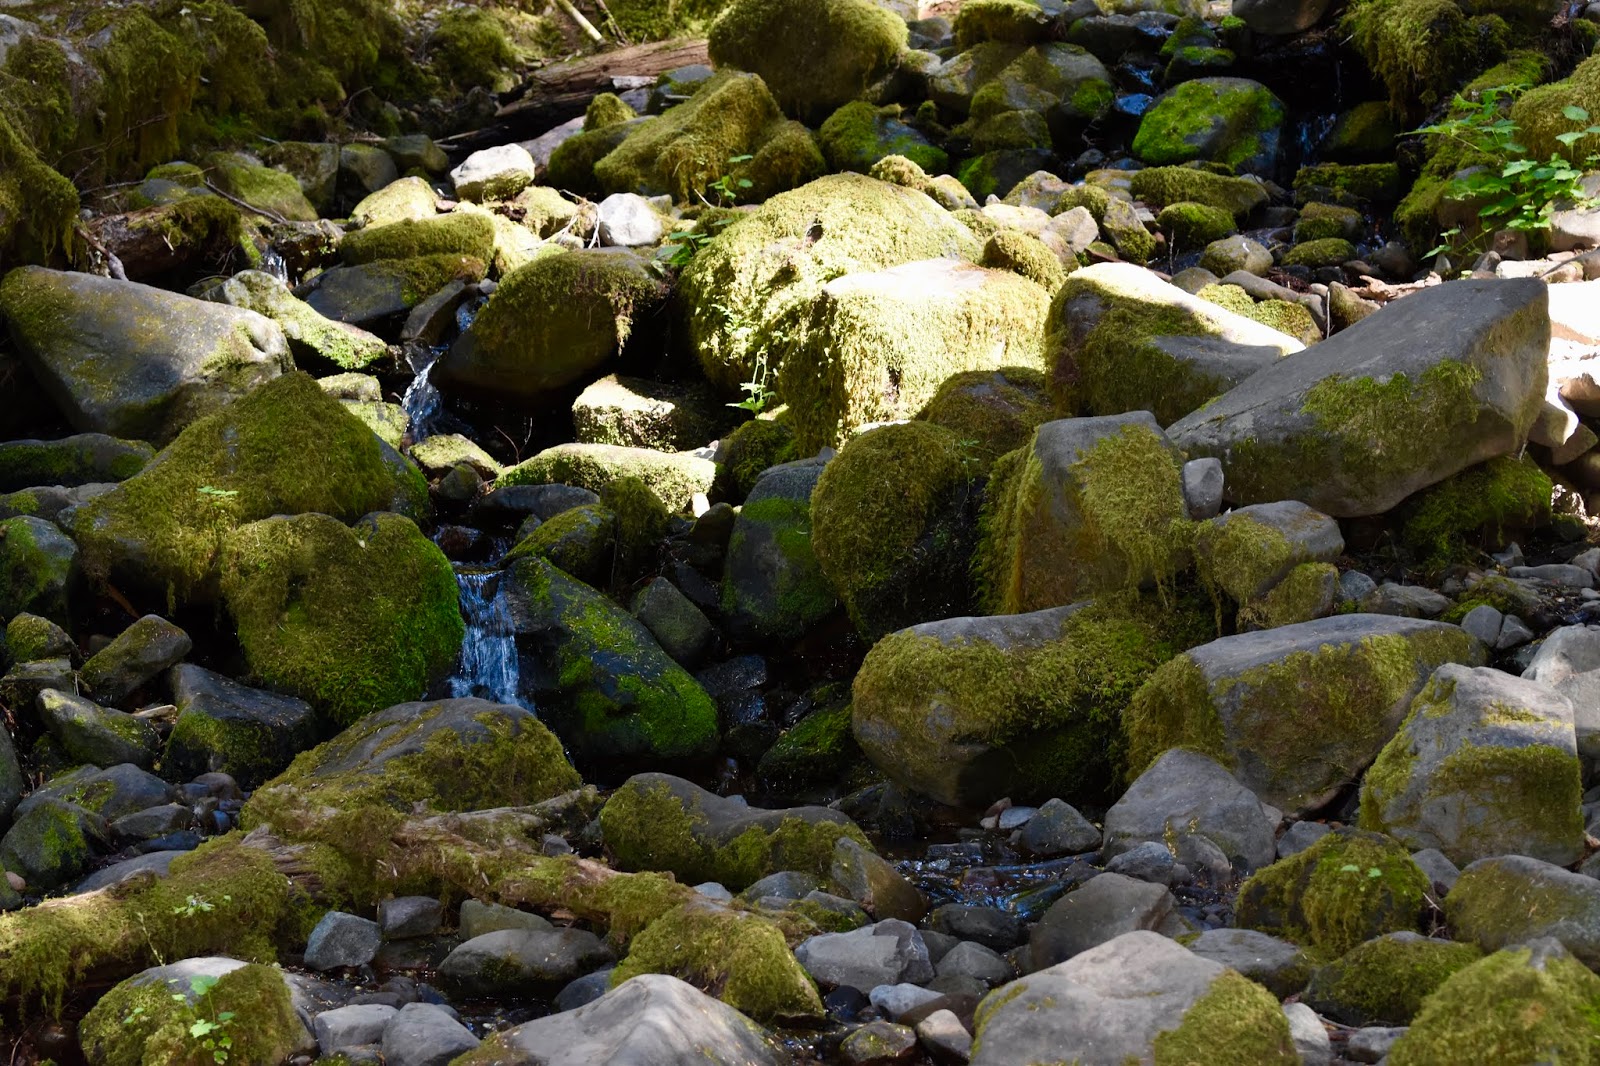 Mossy River Rocks. Moss-covered rocks in a river bed with softly